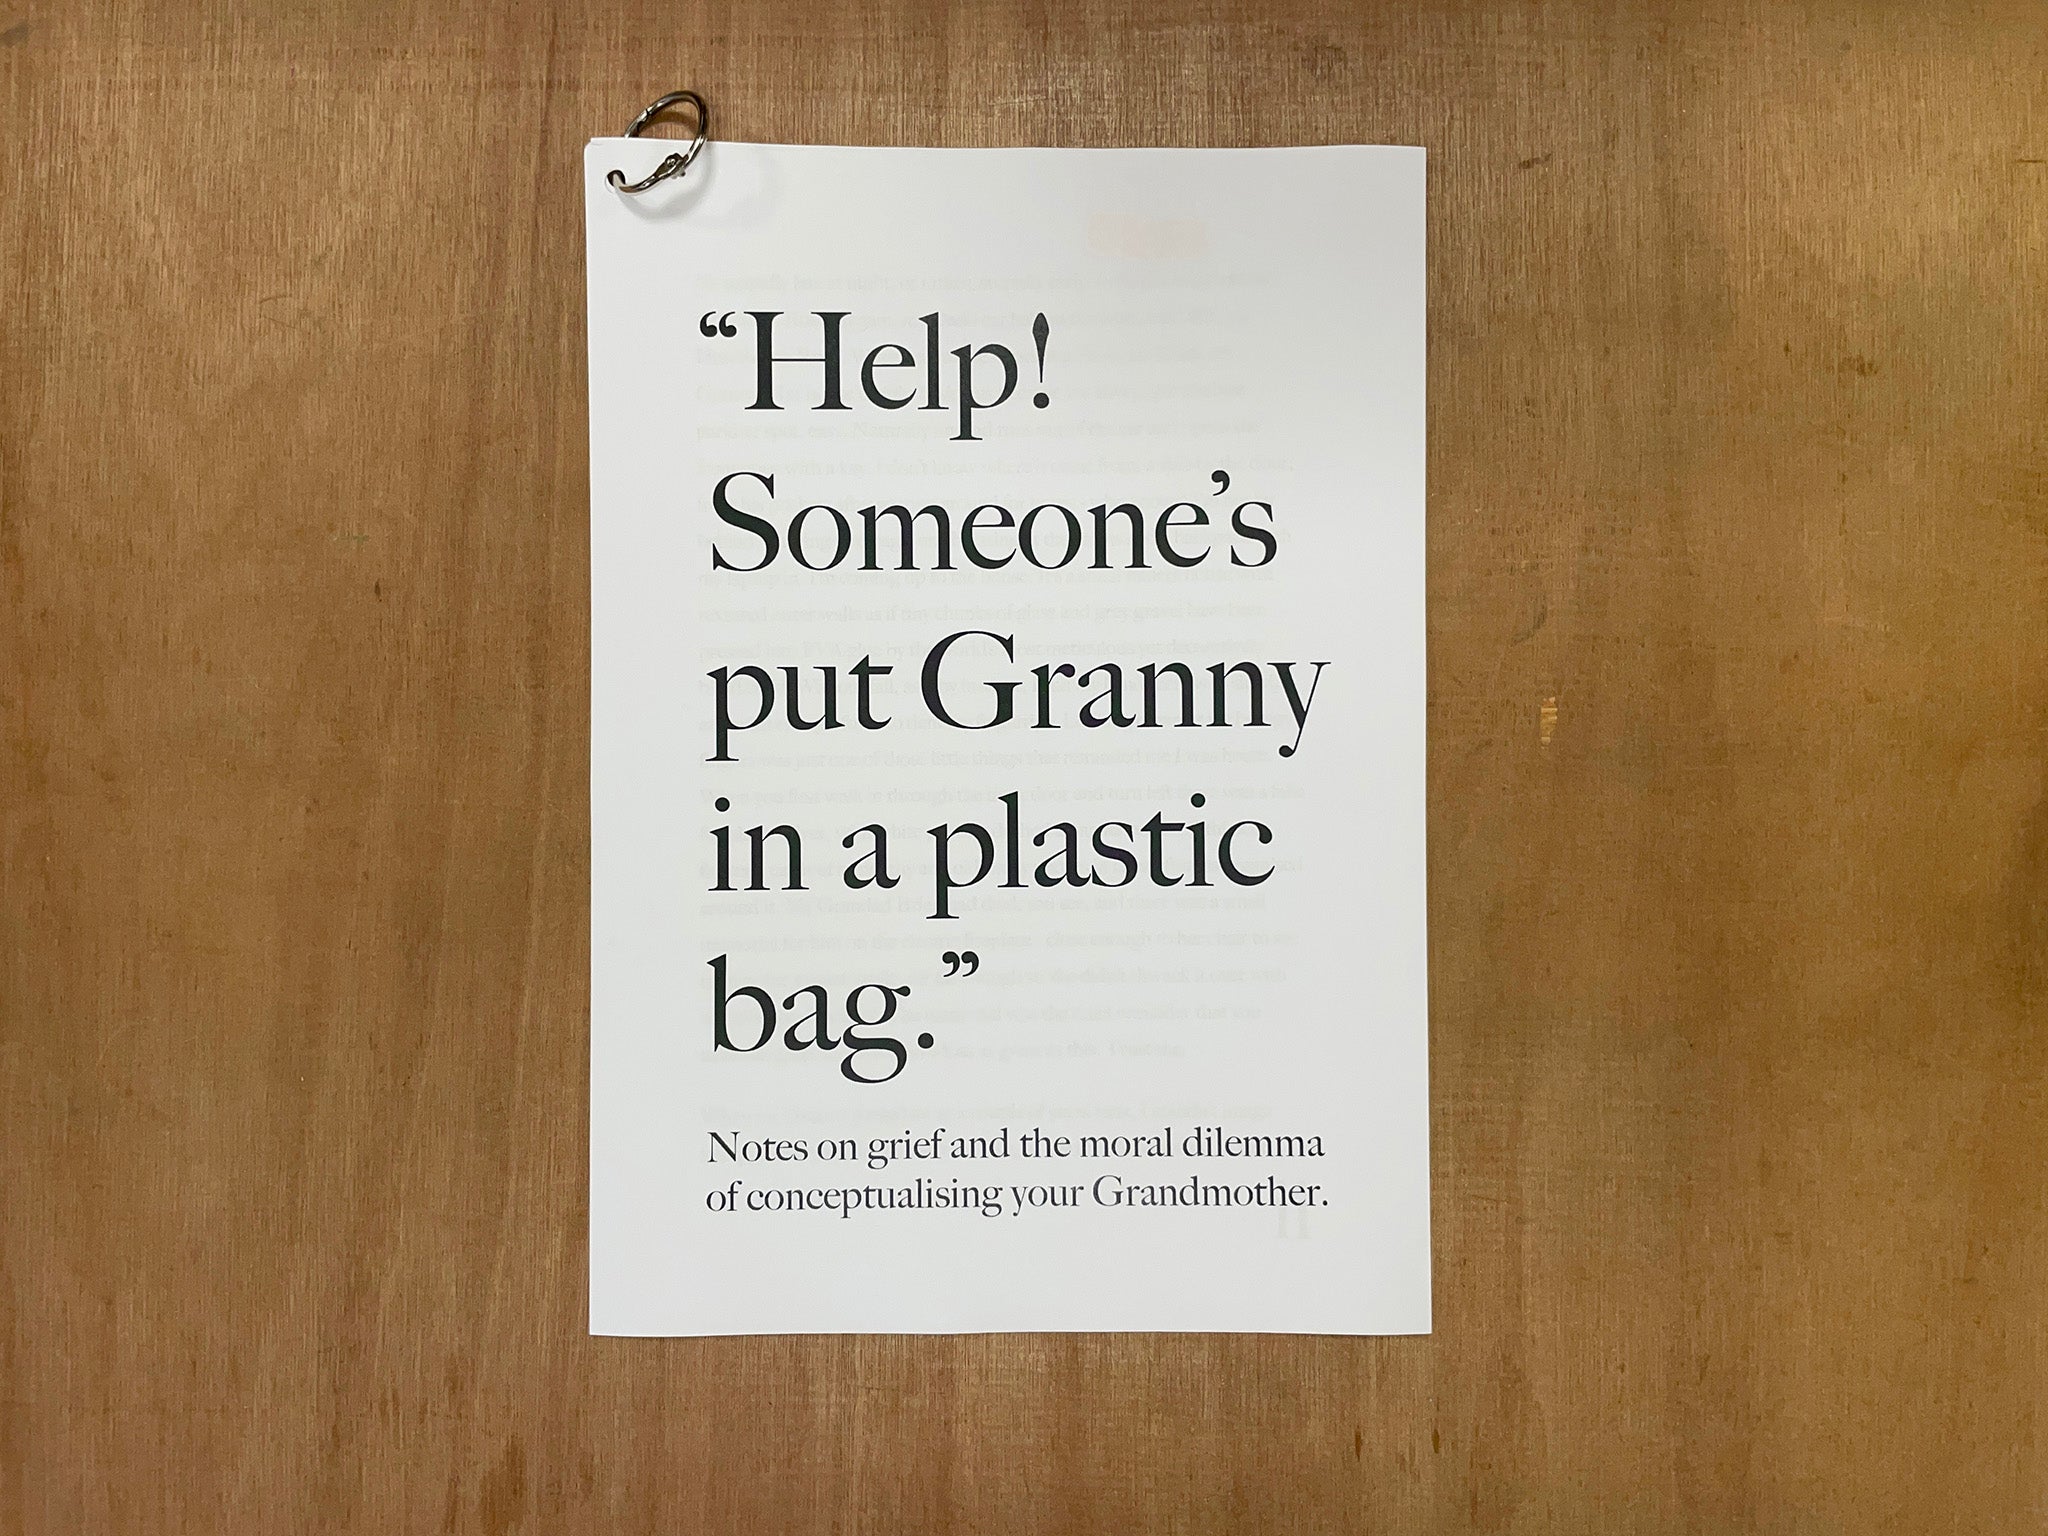 "HELP! SOMEONE'S PUT GRANNY IN A PLASTIC BAG" by Calum-Louis Adams